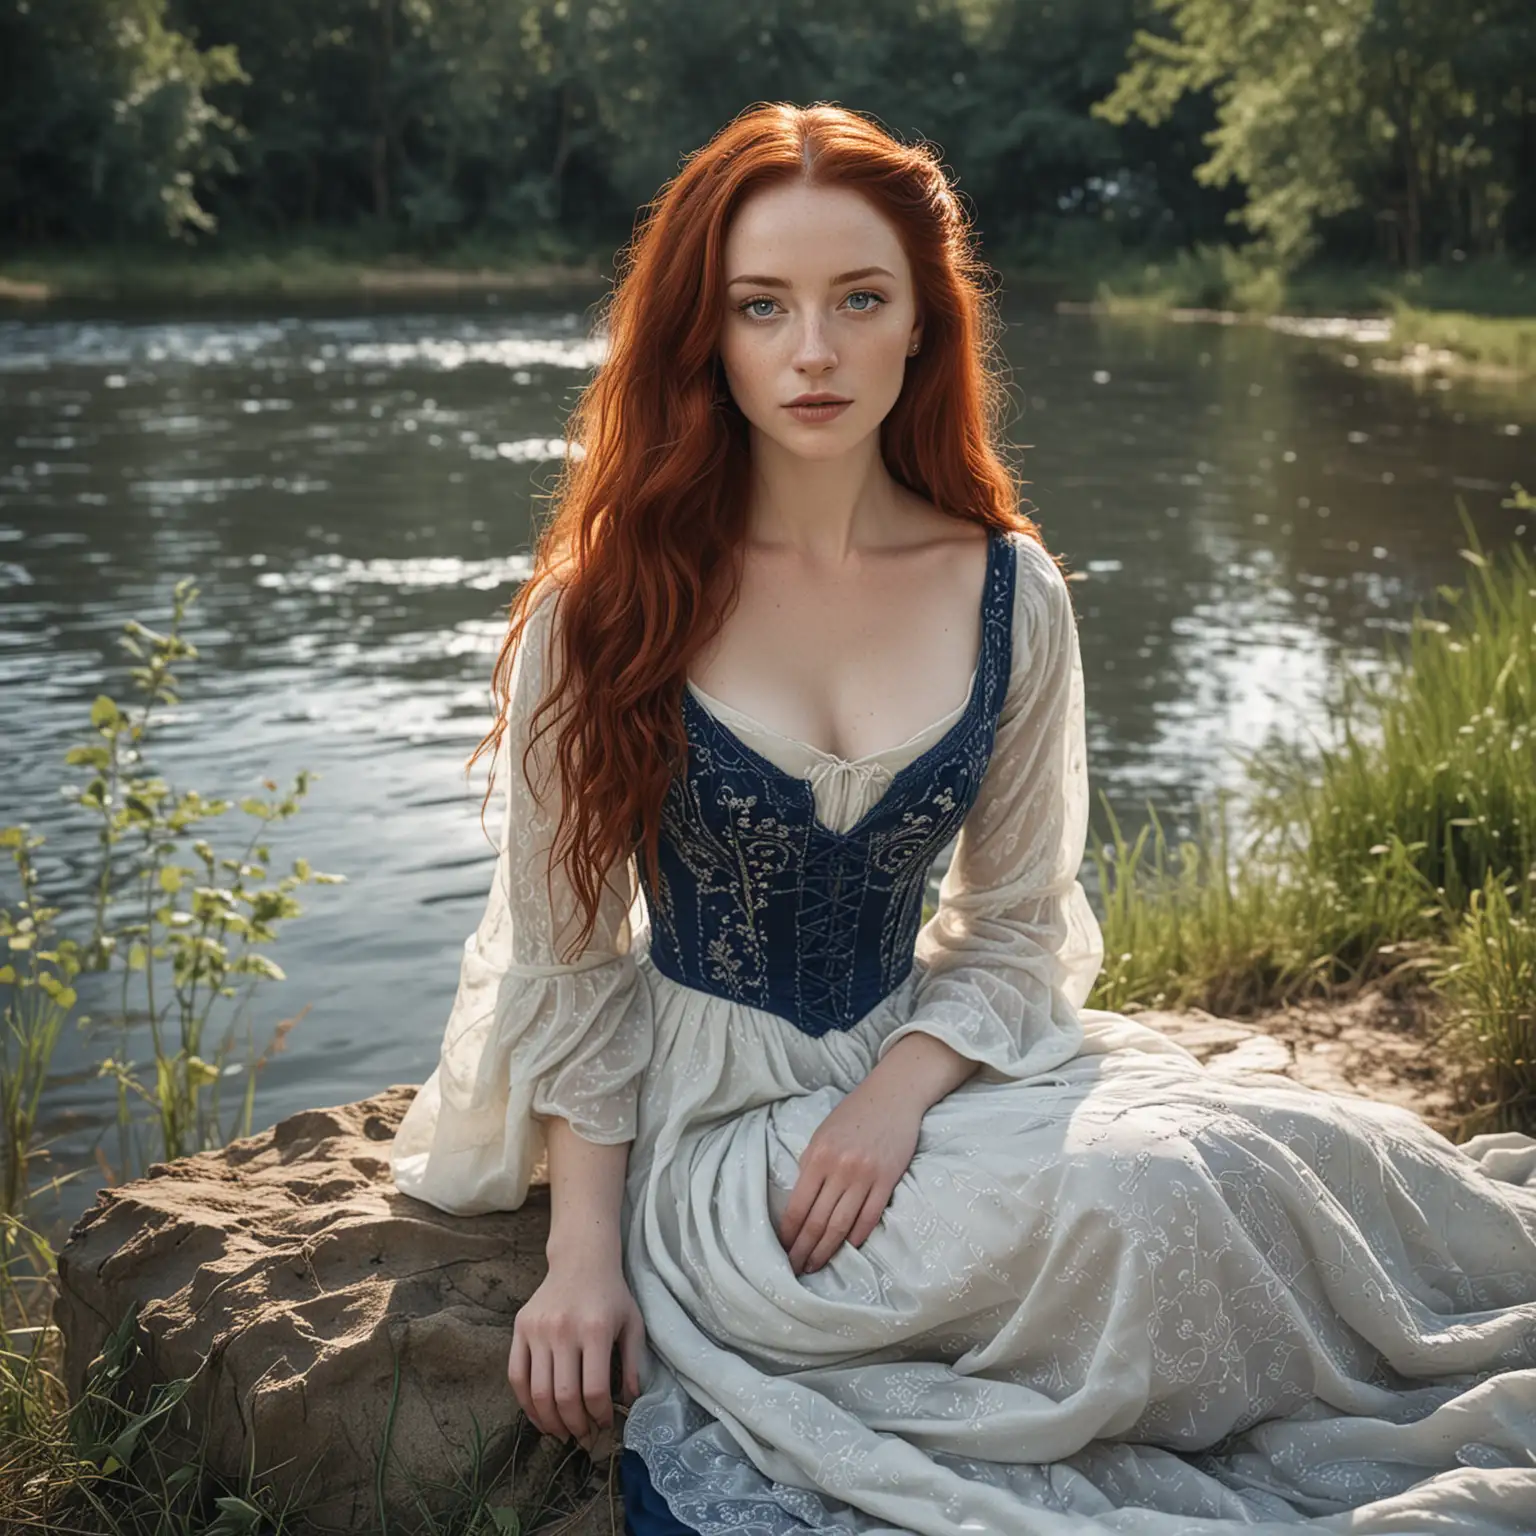 Medieval Fantasy Portrait Enchanting Woman by the River